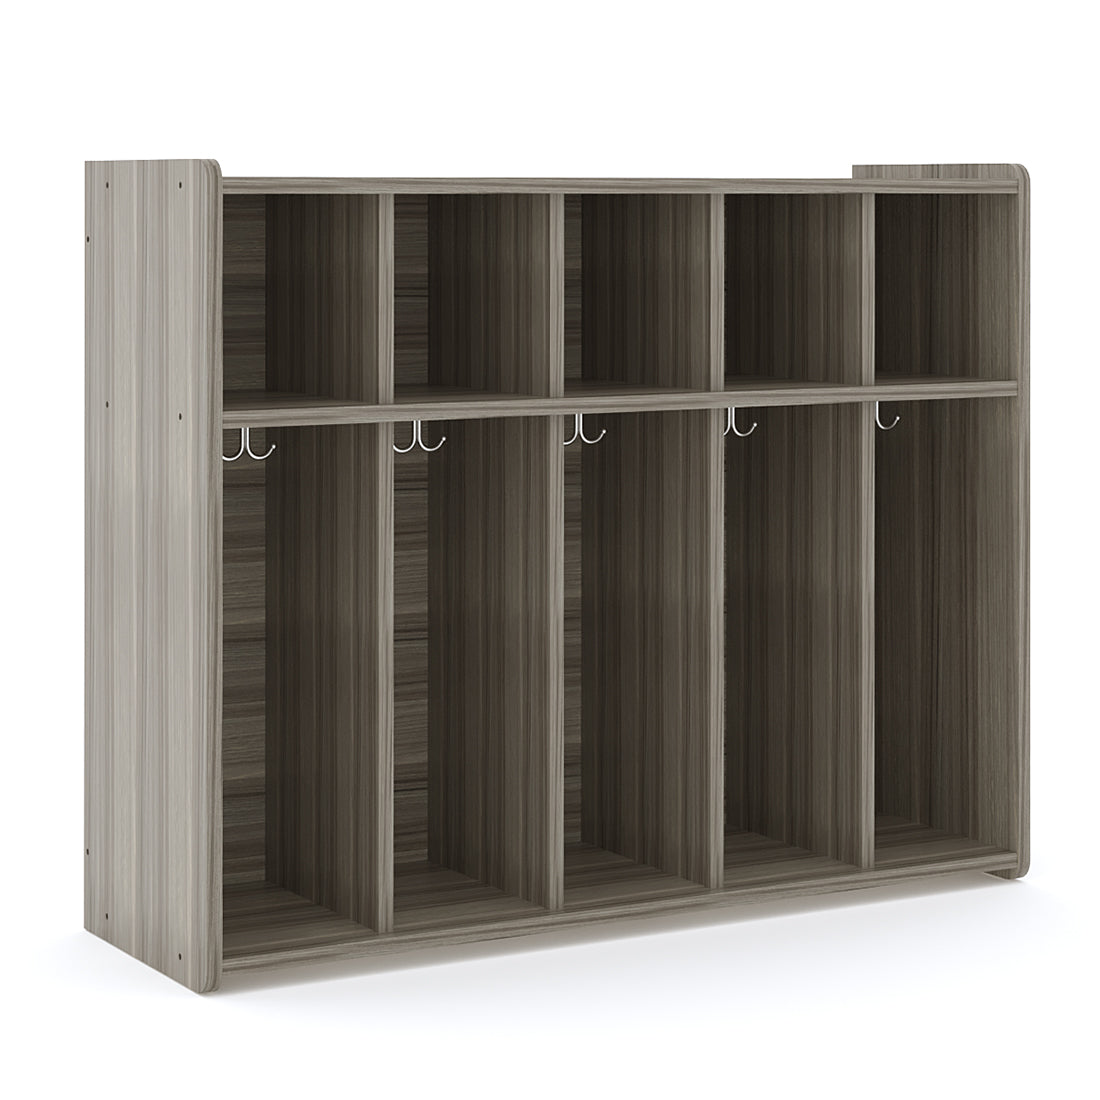 5-Section Wall Locker with Cubbies 46" Wide